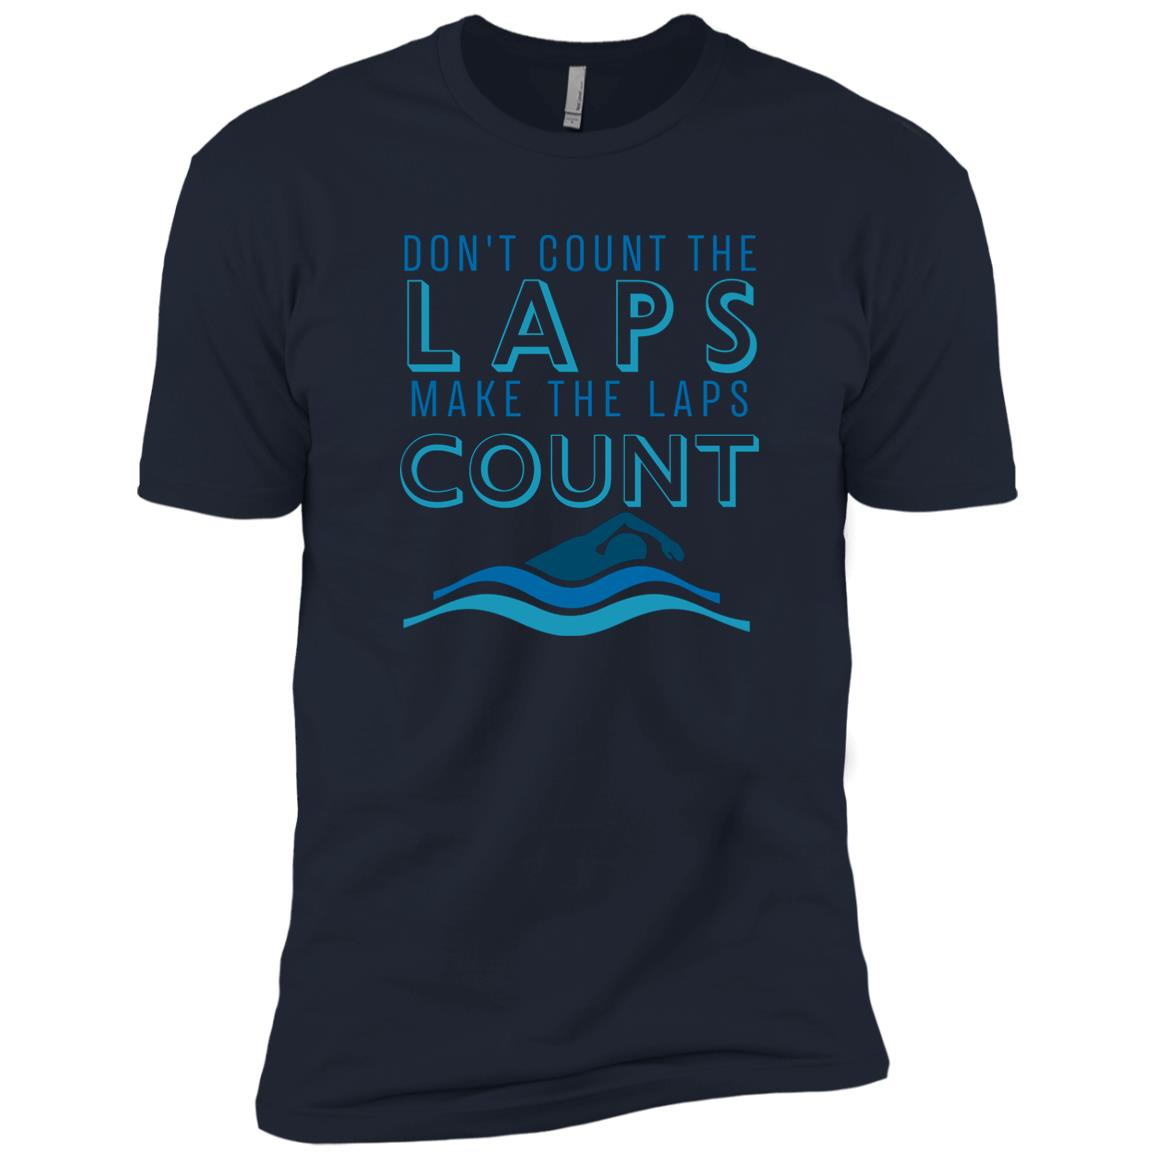 Don't Count the Laps- Youth Comfy T-Shirt